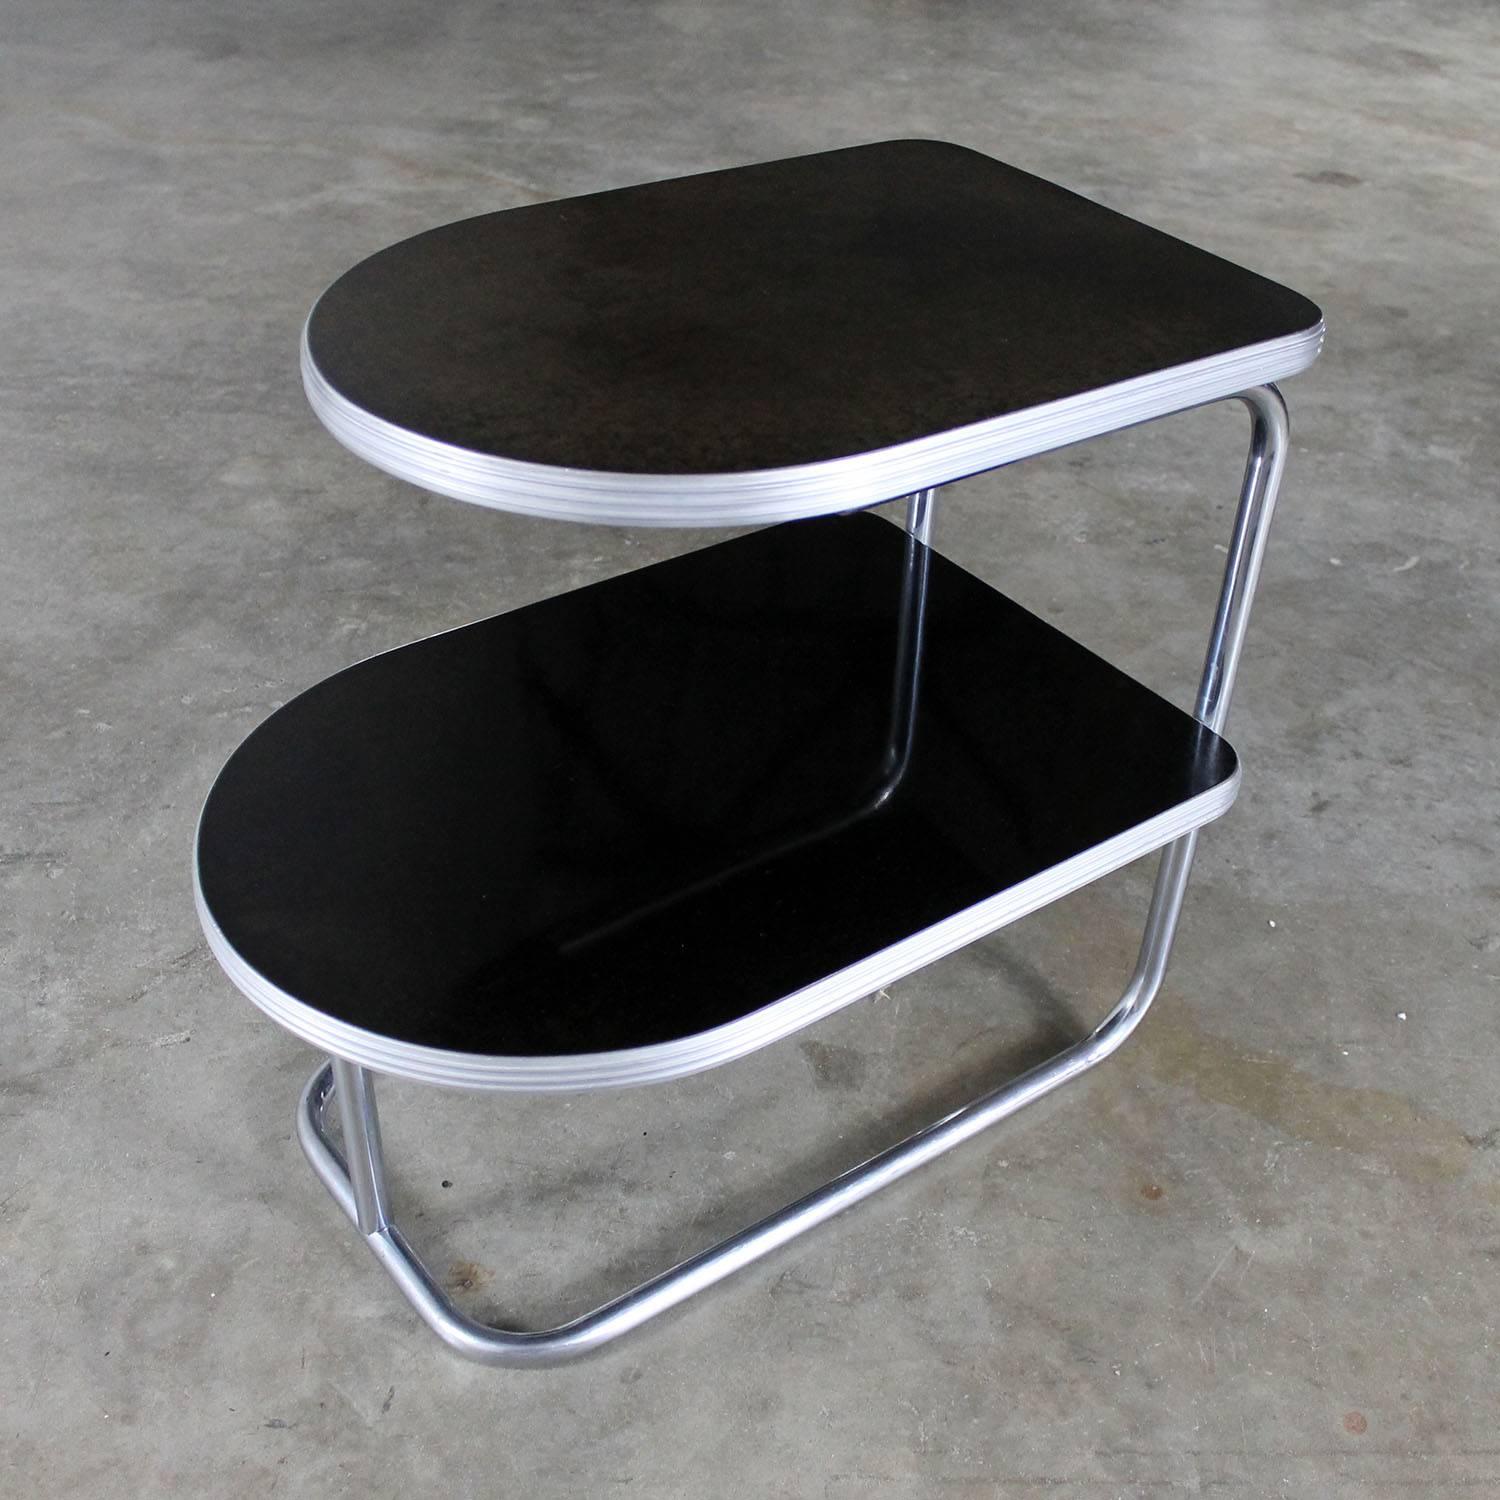 Fabulous, circa 1930s two-tiered streamline moderne machine age Art Deco chrome and black end table with Fireloid original surfaces. In wonderful vintage condition. The chrome and aluminum are in awesome shape and the lower surface is perfect;